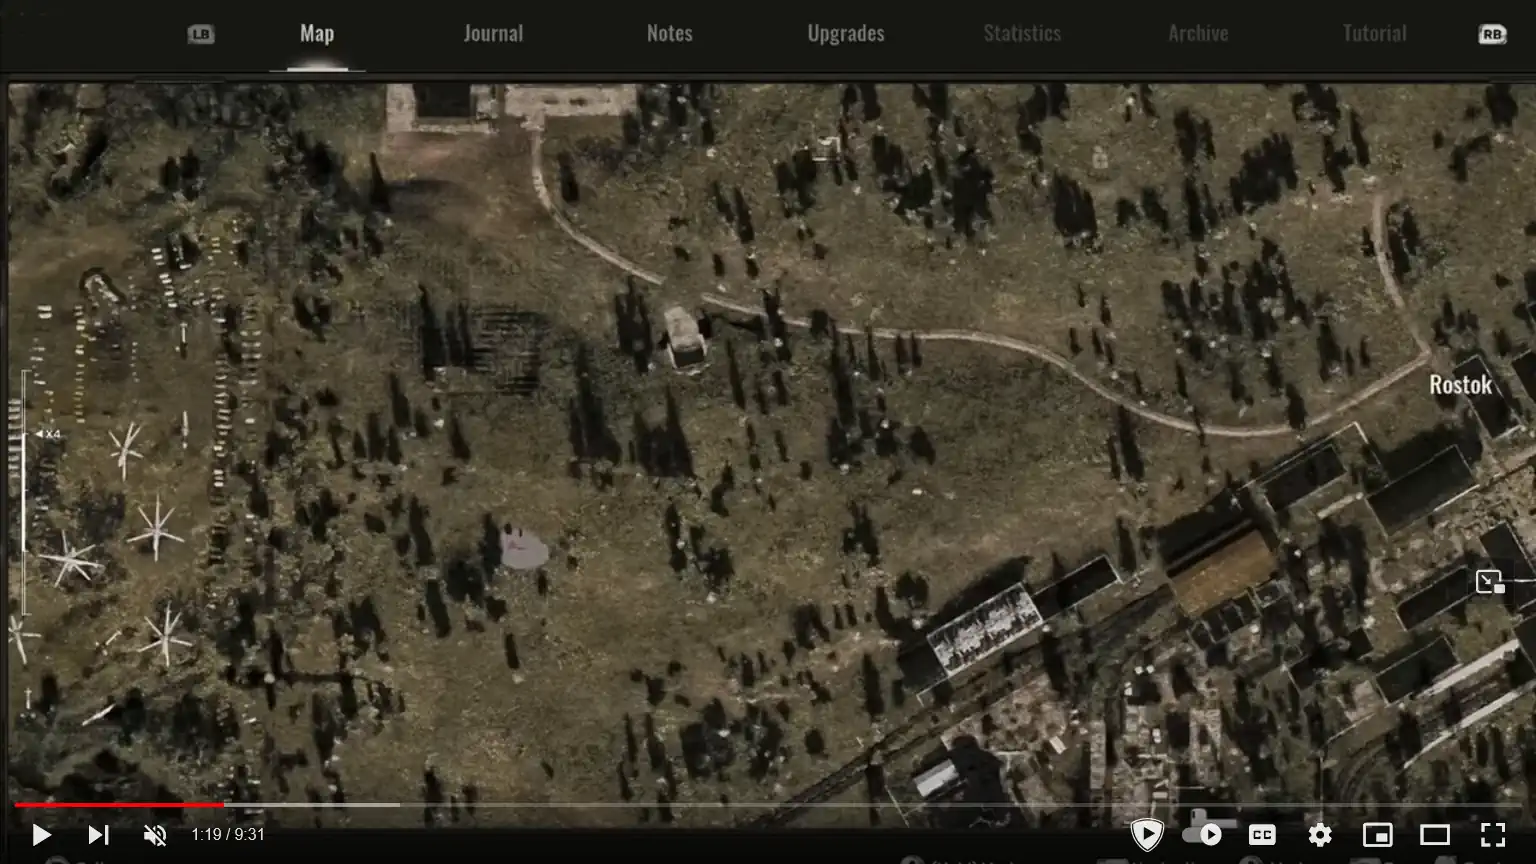 Stalker 2 Xbox map view. Showing Rostok and the truck cemetery.